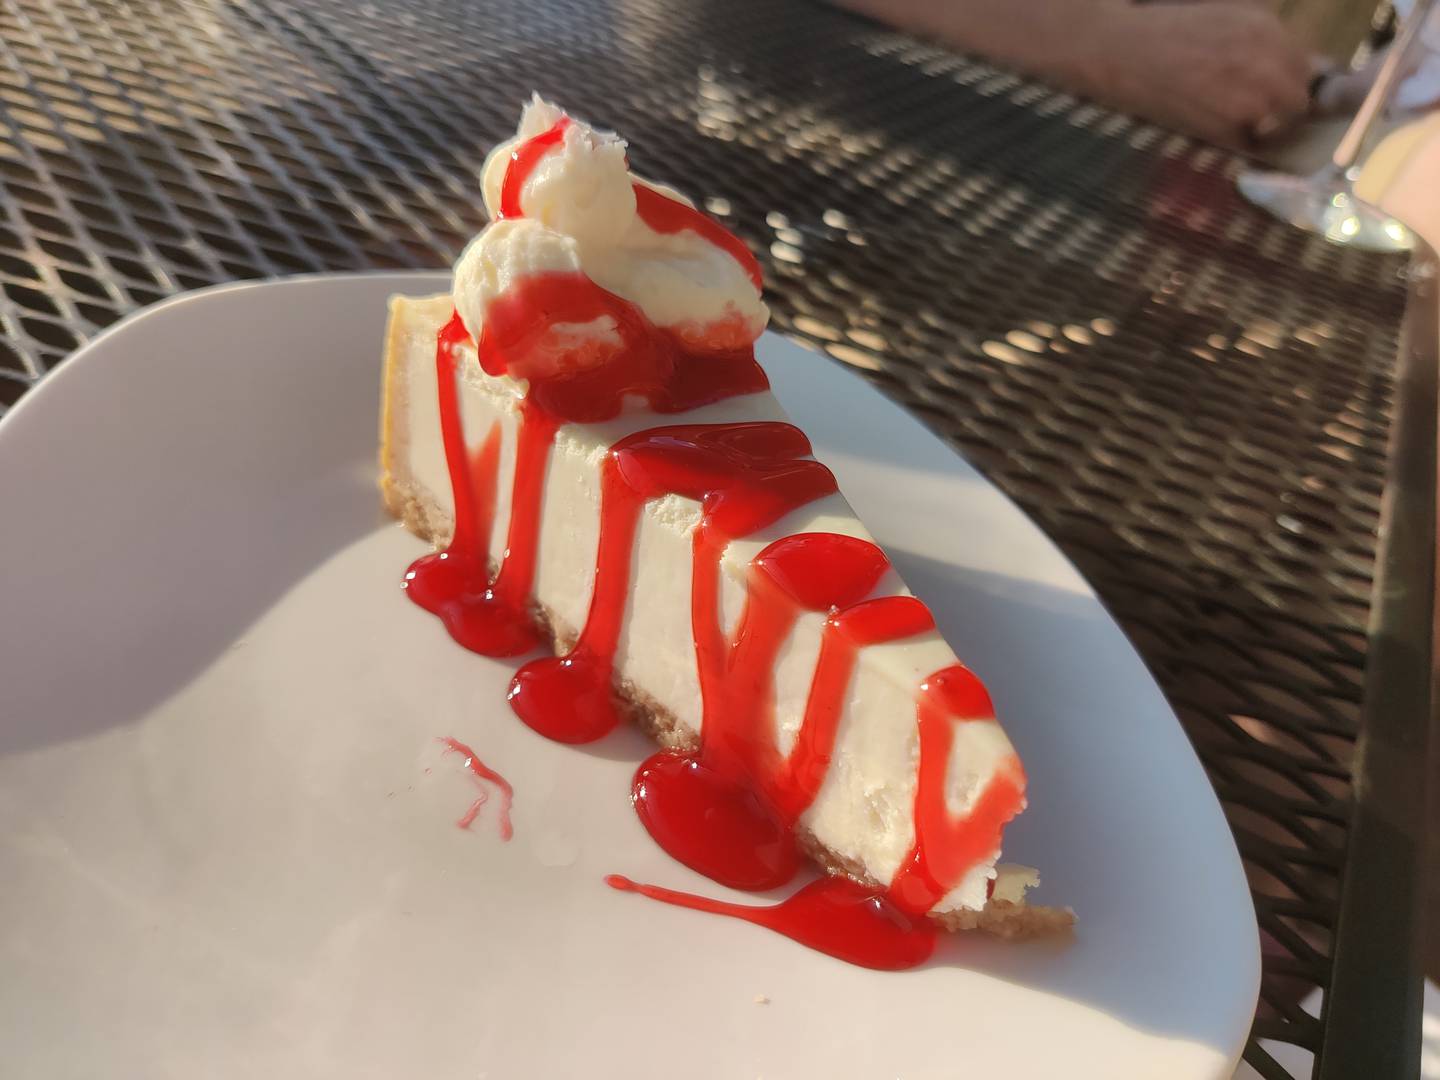 A slice of cheesecake at Pal Joey's in downtown Batavia.